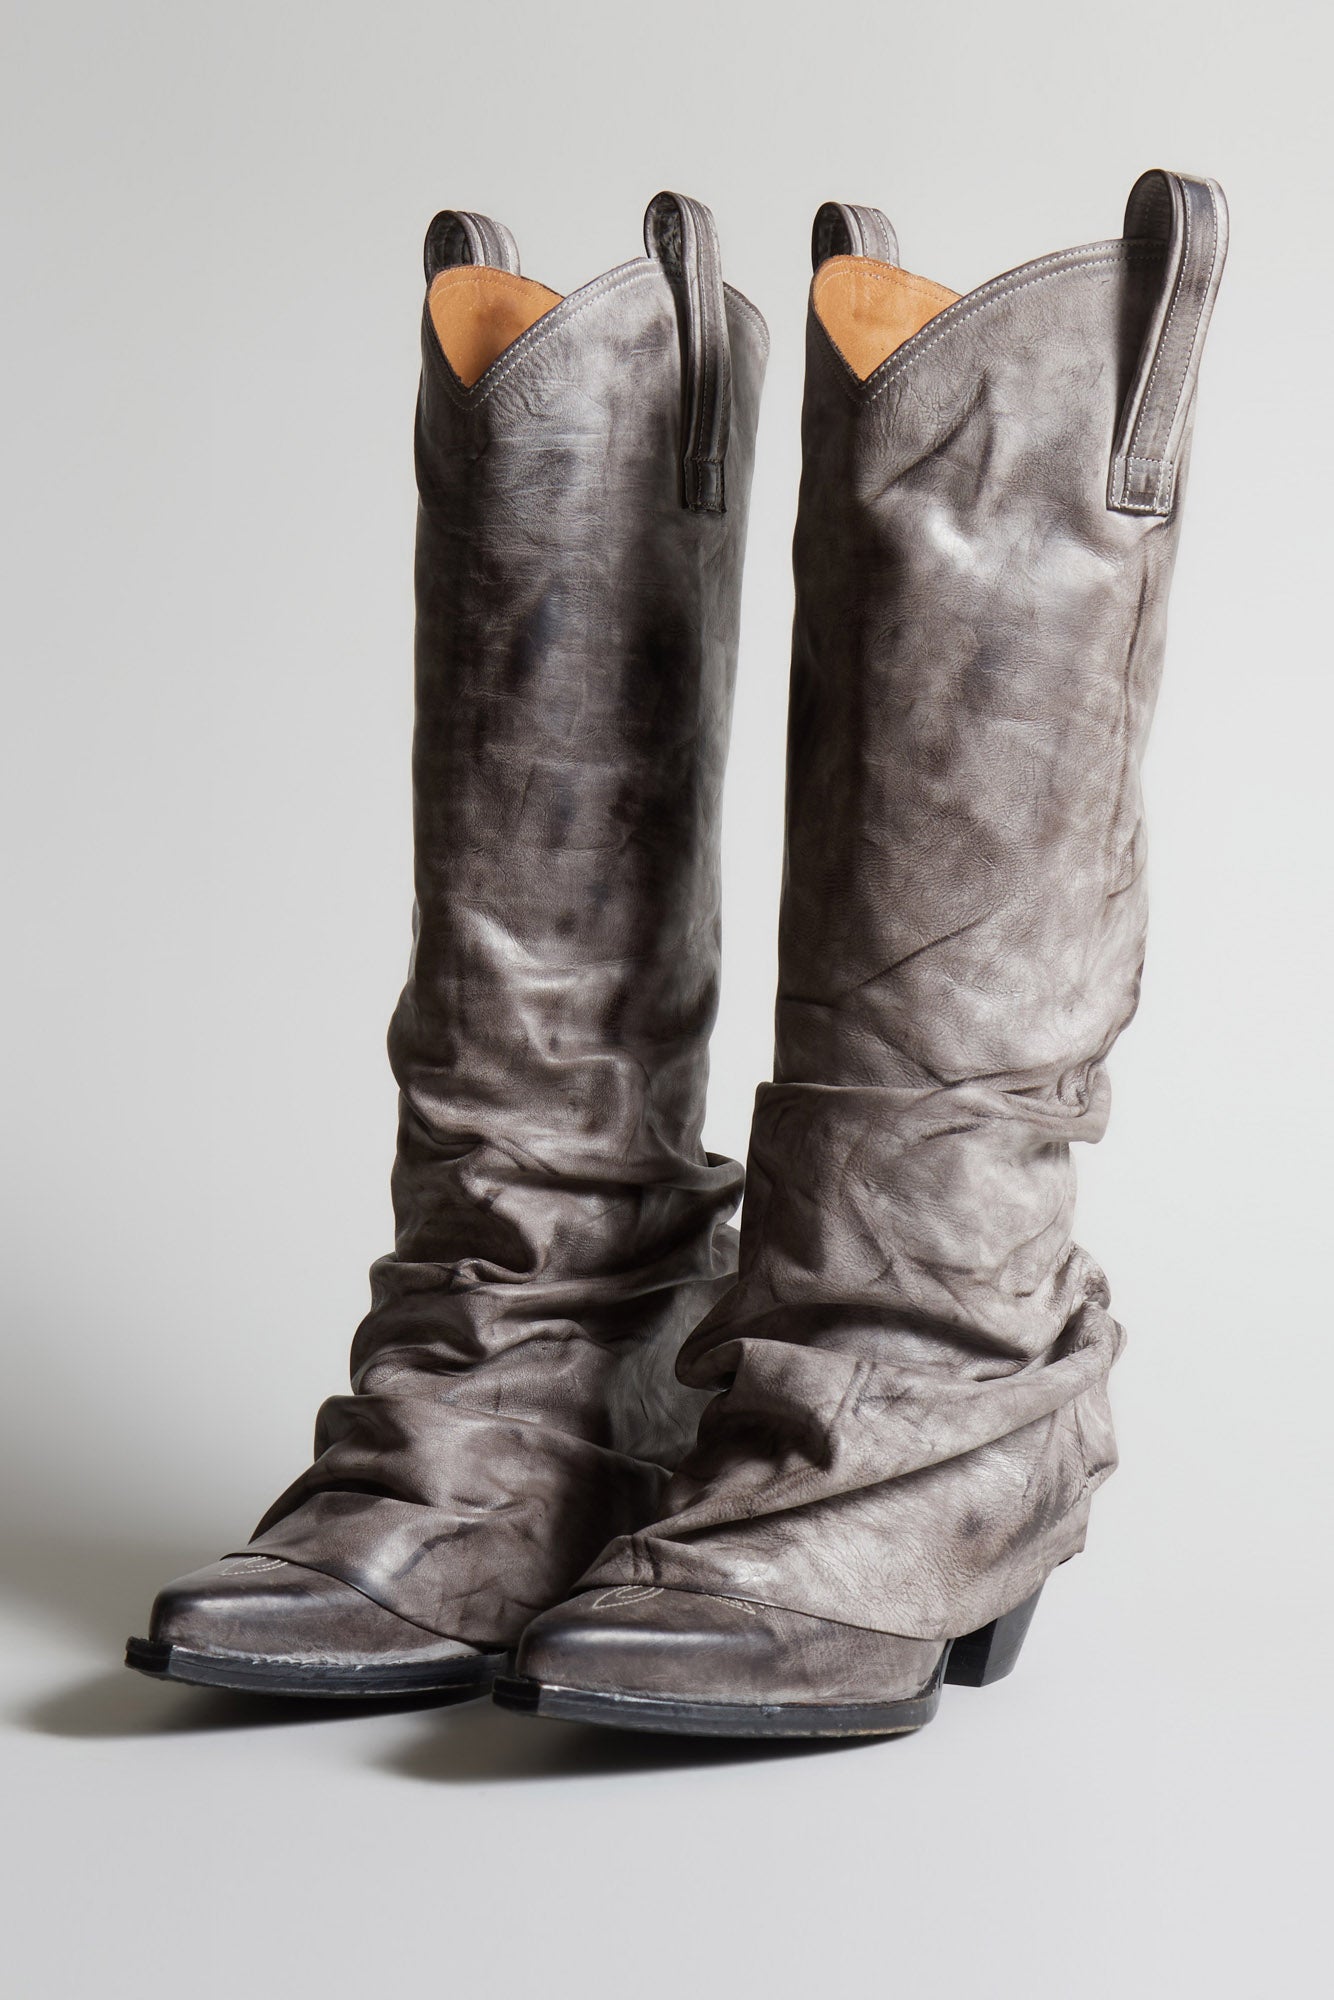 MID COWBOY BOOTS WITH SLEEVE - DISTRESSED GREY LEATHER